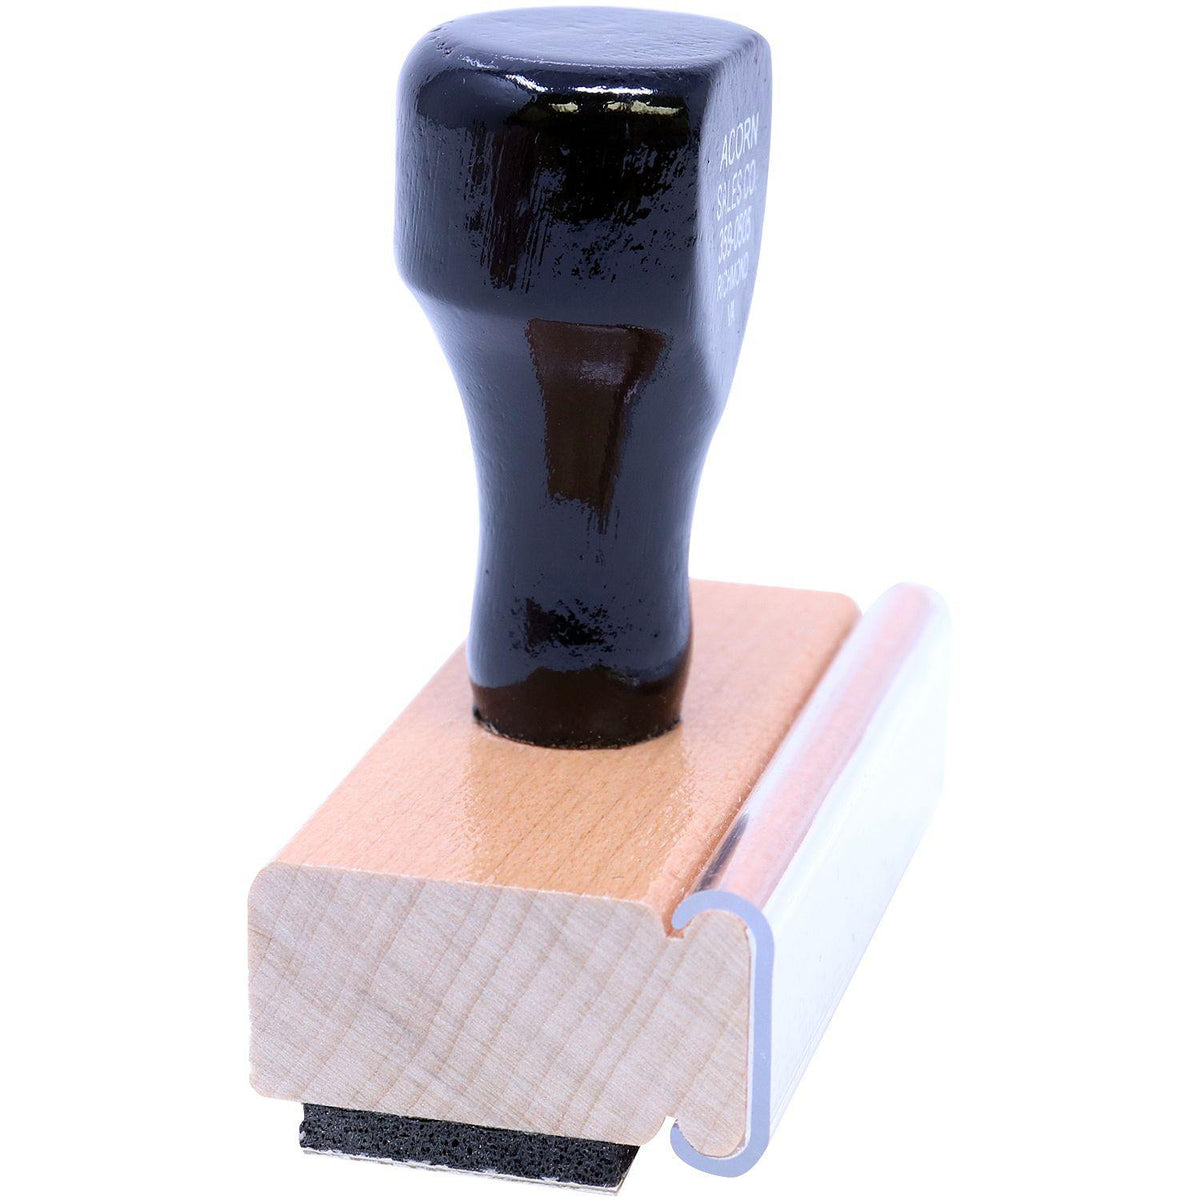 Side View of Confirmation Rubber Stamp at an Angle